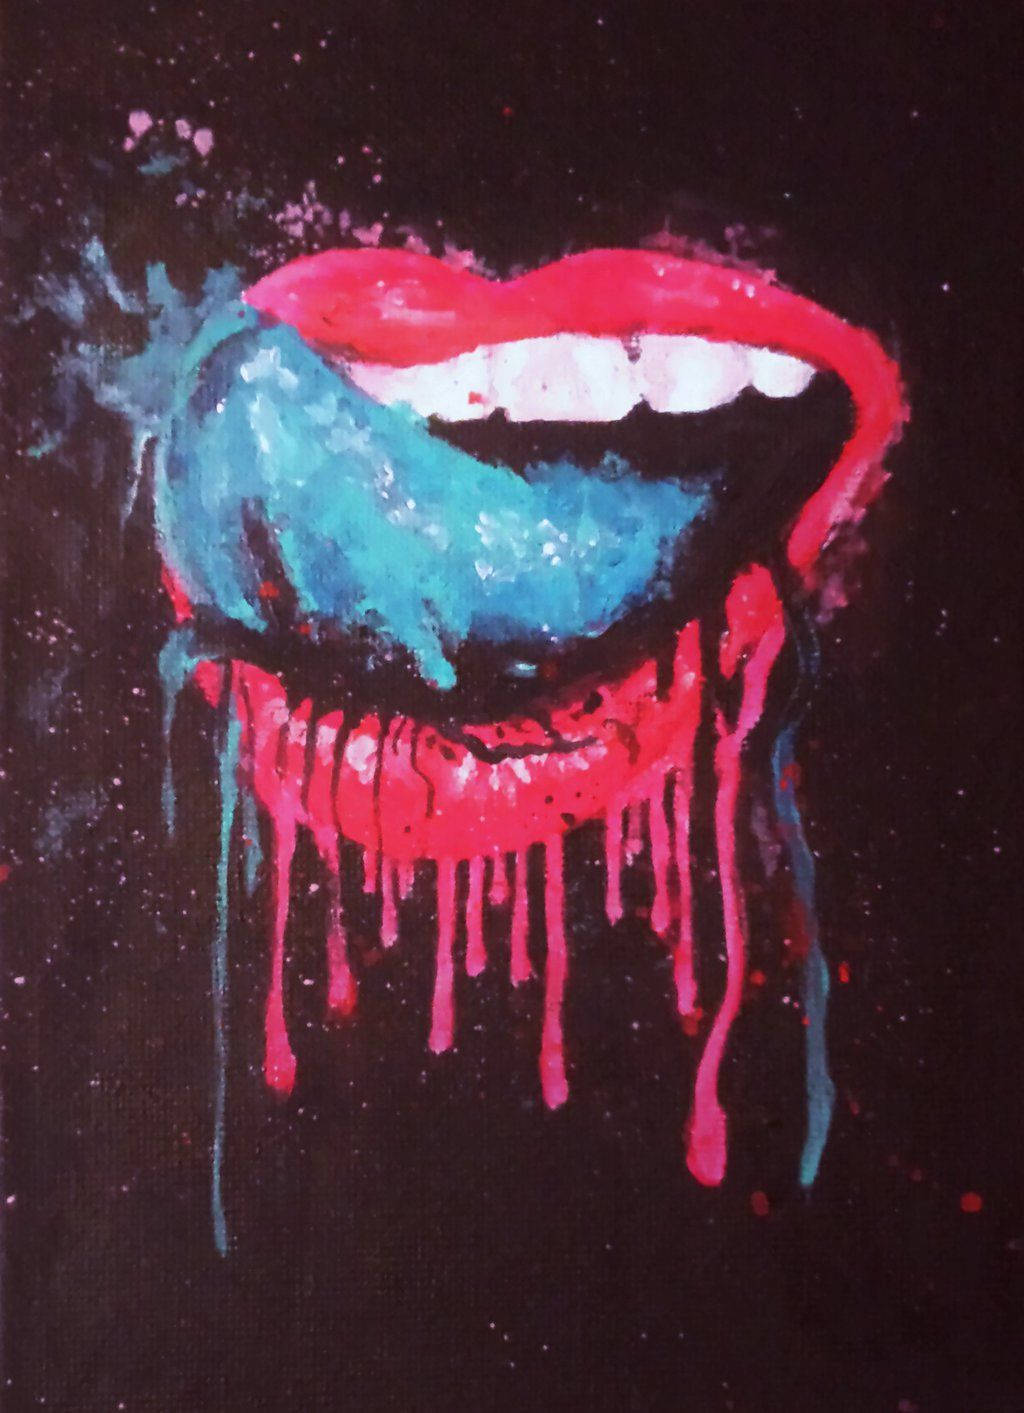 Stunning Artwork Of A Cool Dripping Mouth